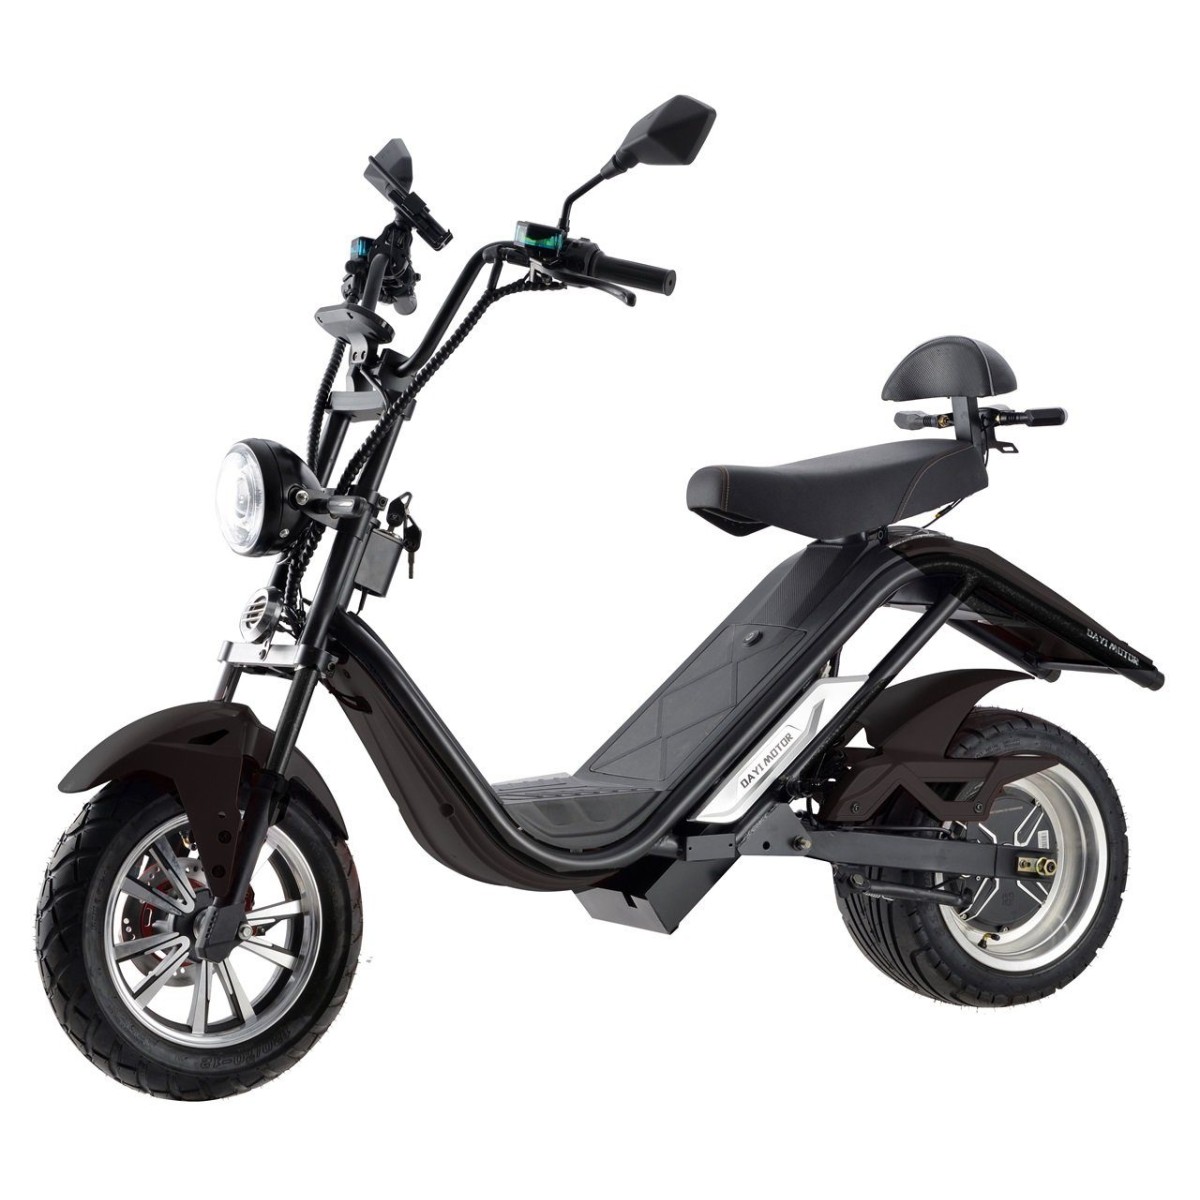 DAYI 4000W BRUSHLESS MOTOR SPORTY ELECTRIC SCOOTER E-THOR 5.0C EEC WITHOUT TRUNK AND SIDE BAG